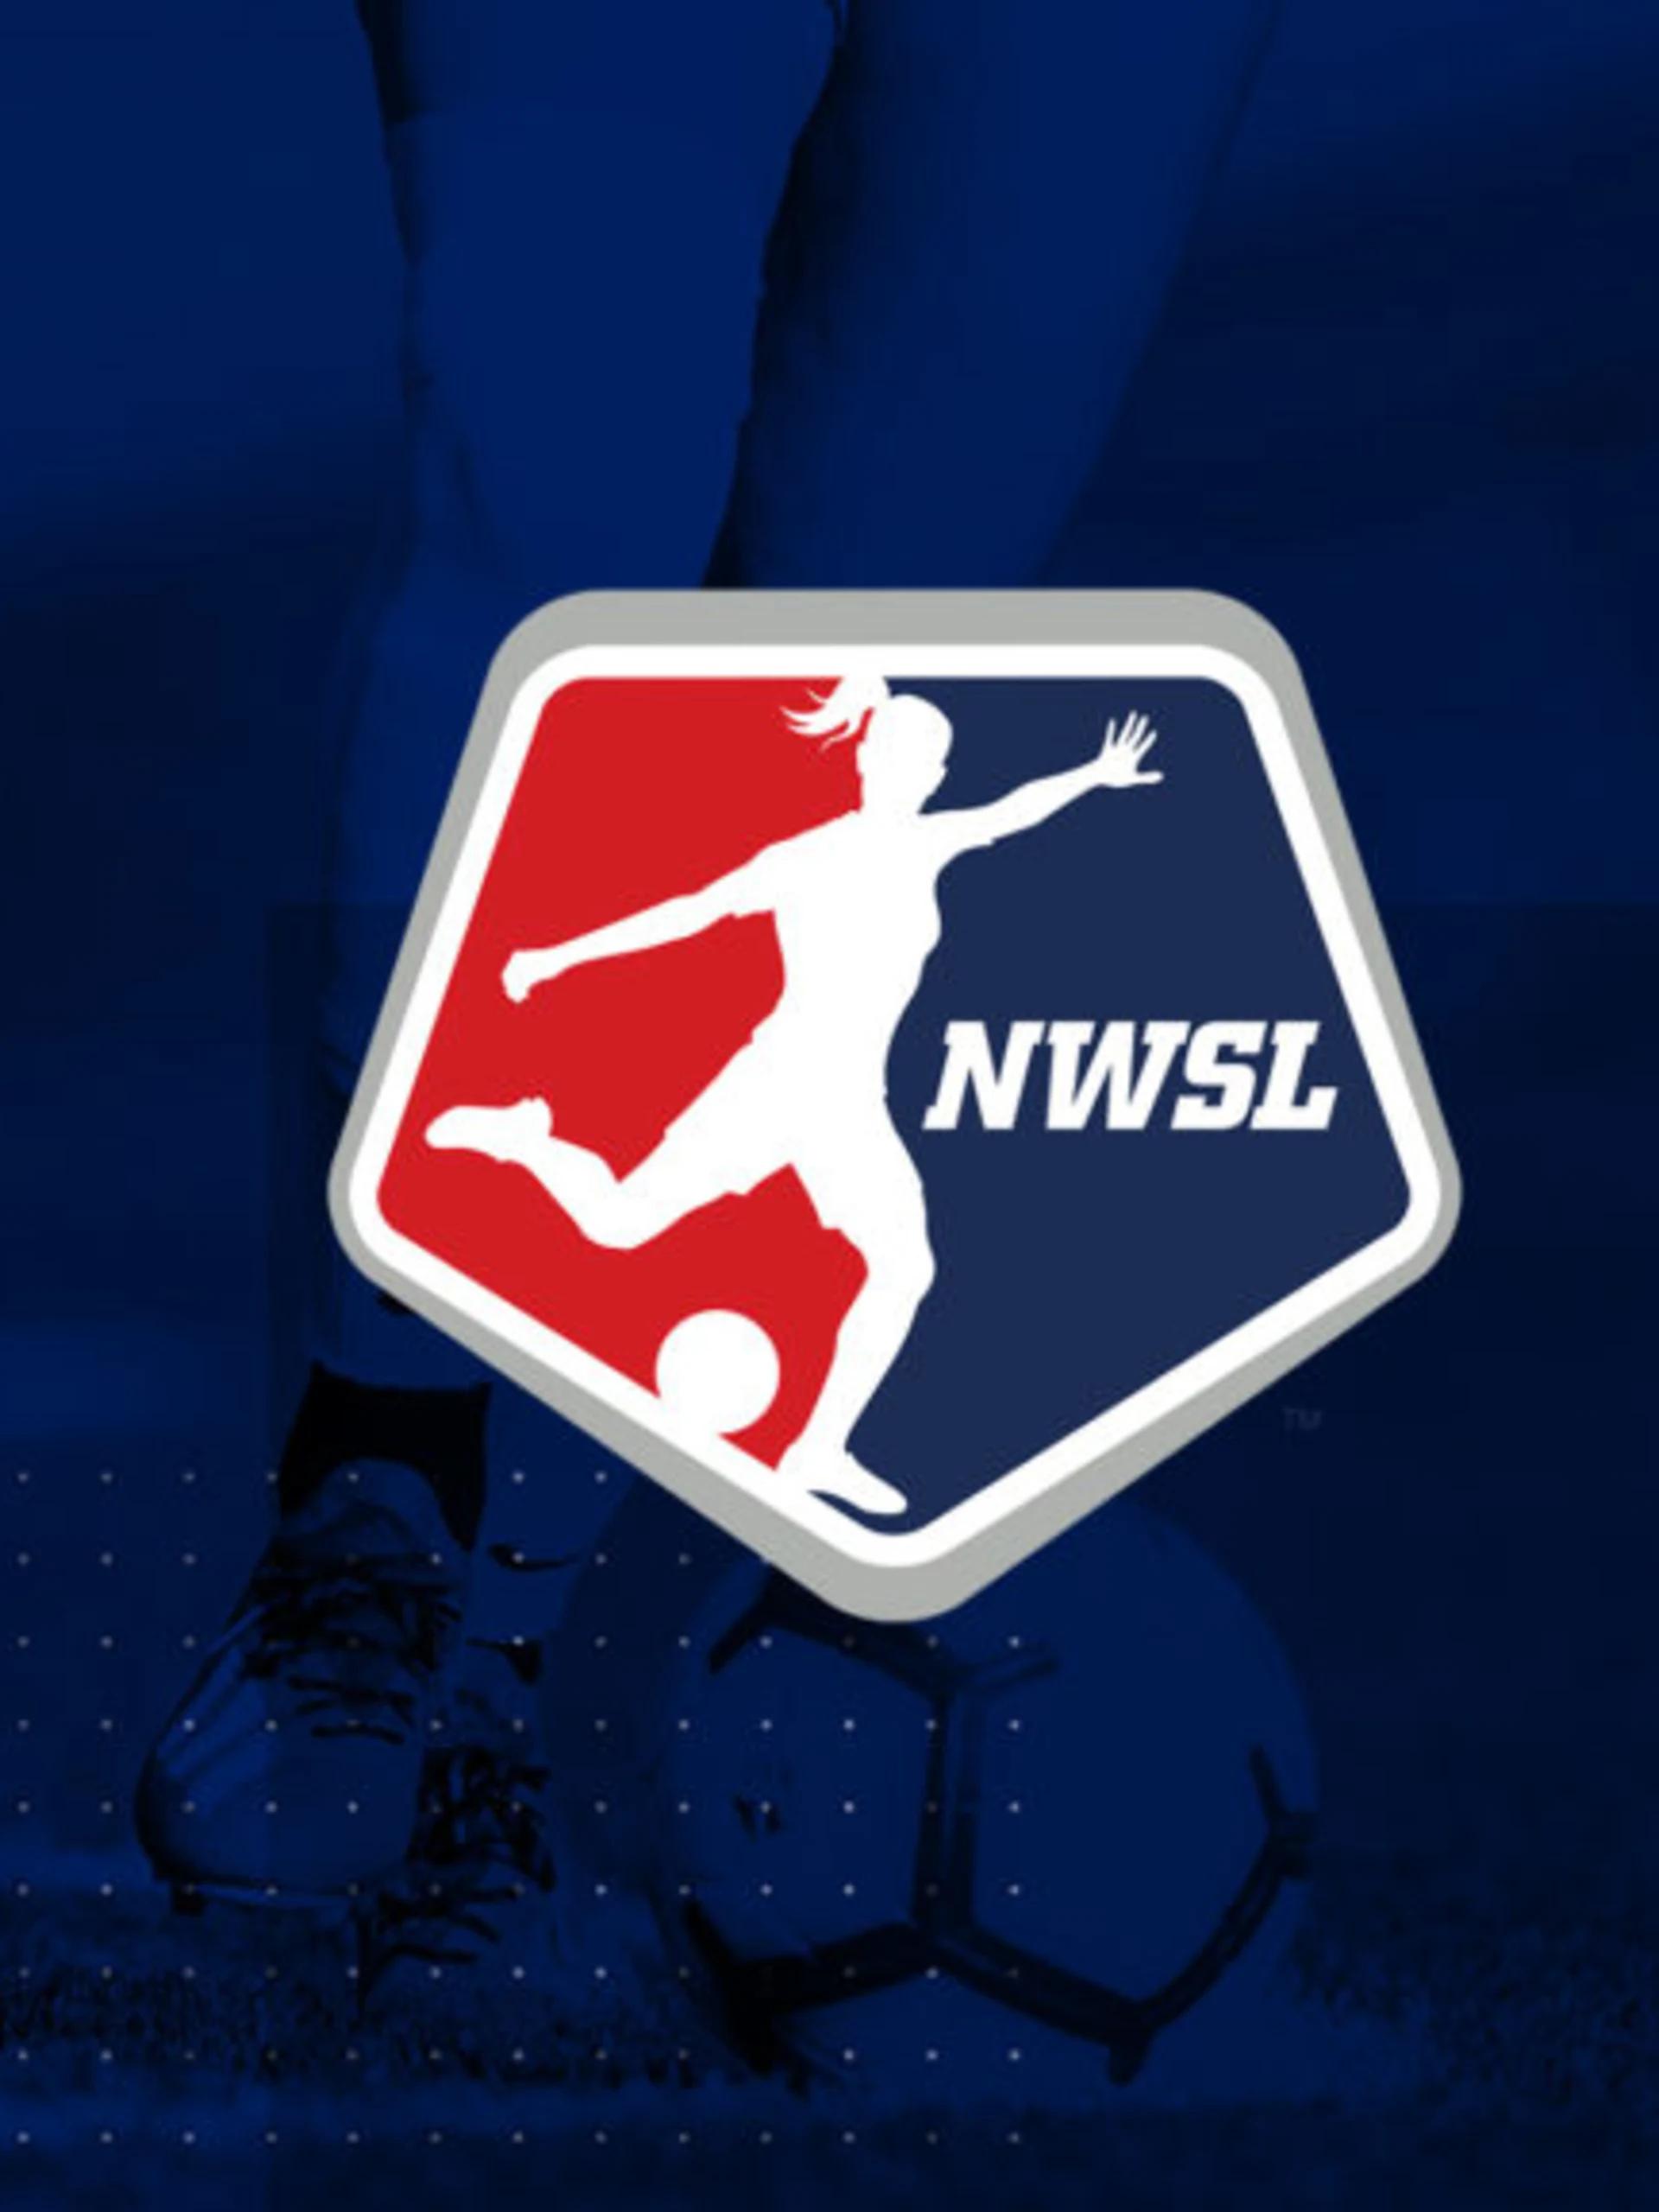 story-image-2020-nwsl-challenge-cup-presented-by-p038g-and-secret-anthem-update